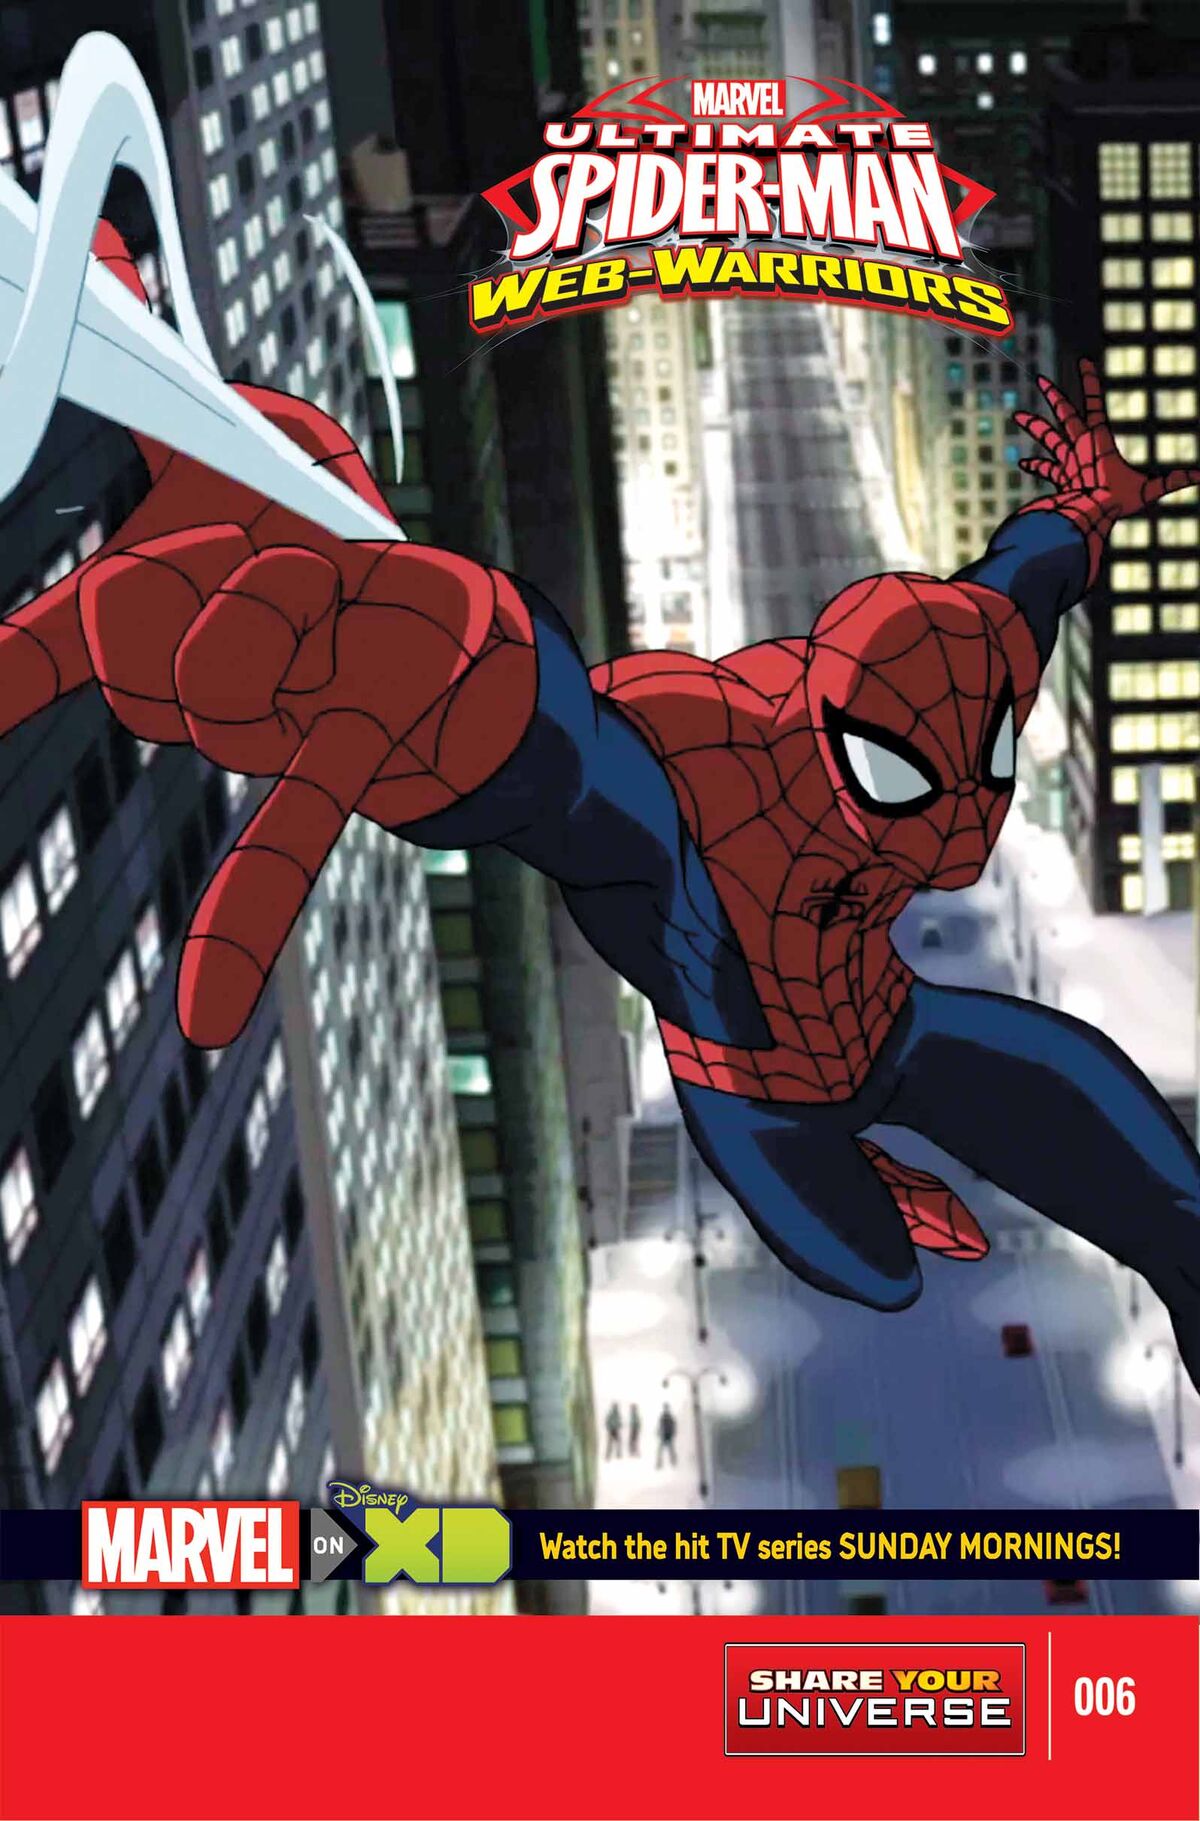 Marvel Universe: Ultimate Spider-Man: Web-Warriors - The Incredible Spider-Hulk, Ultimate Spider-Man Animated Series Wiki